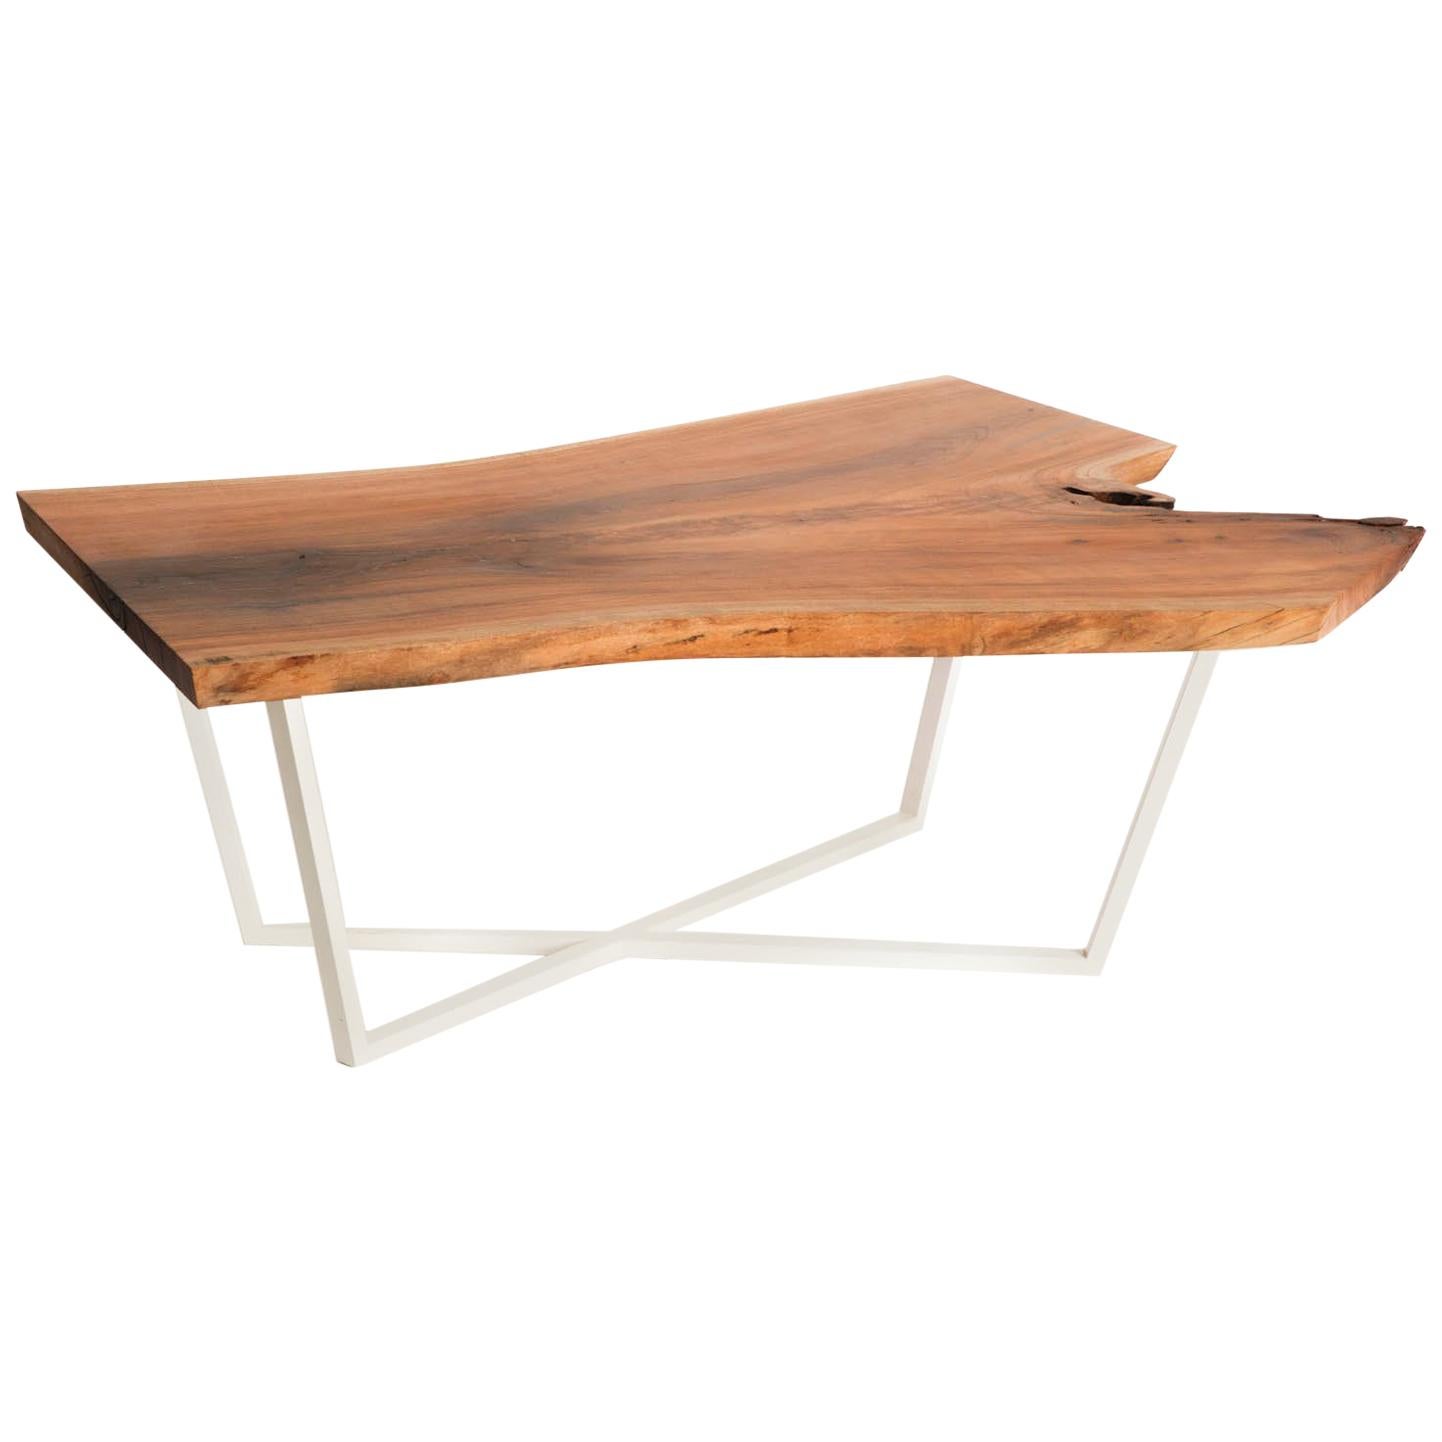 Live Edge Cherry Slab Wooden Coffee Table with Modern White Steel Base